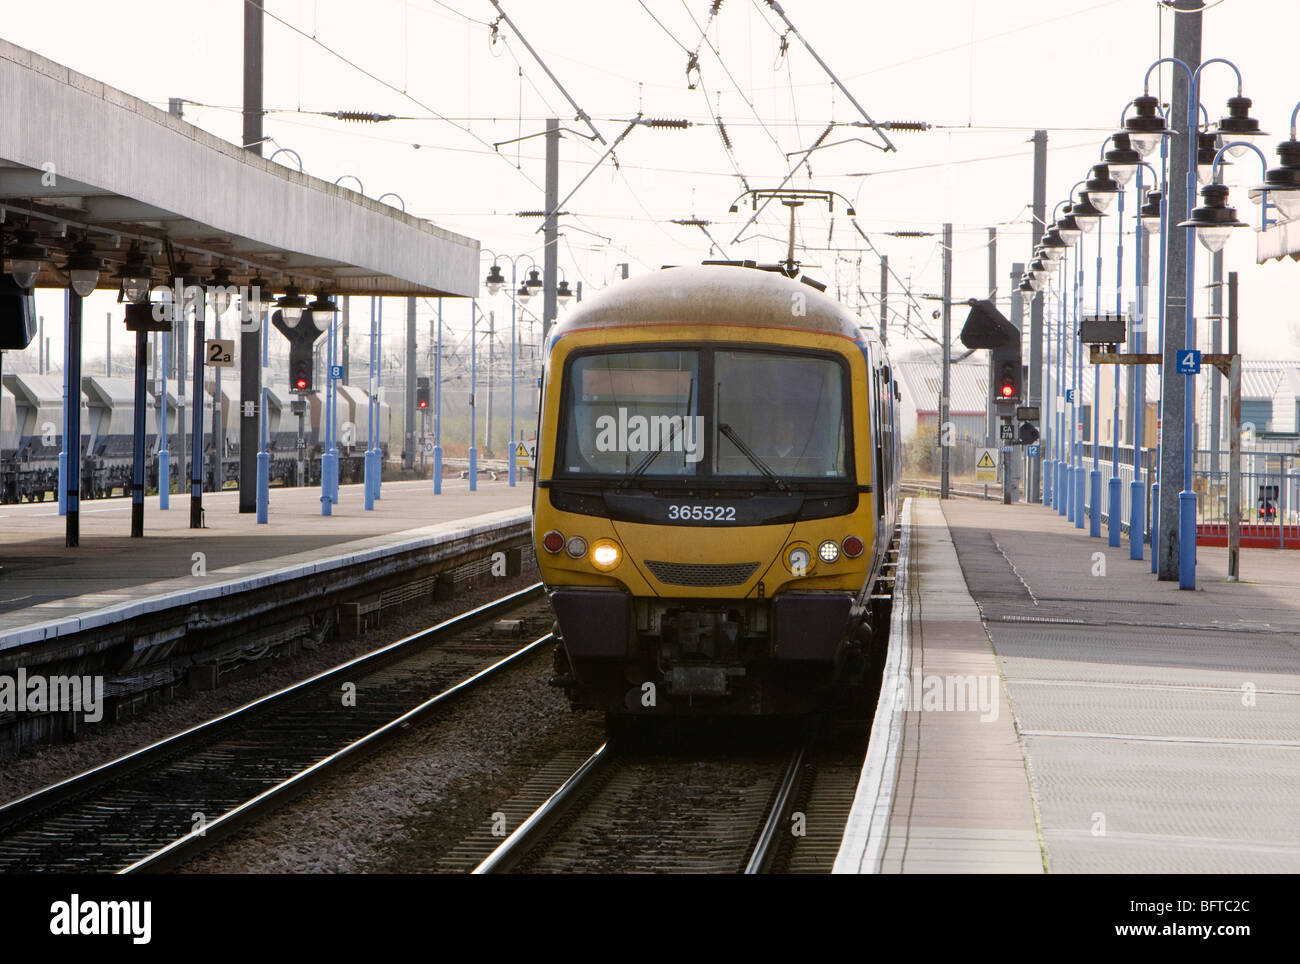 An electric passenger train from King's Cross pulls in to Ely station in Cambridgeshire, UK Stock Photo